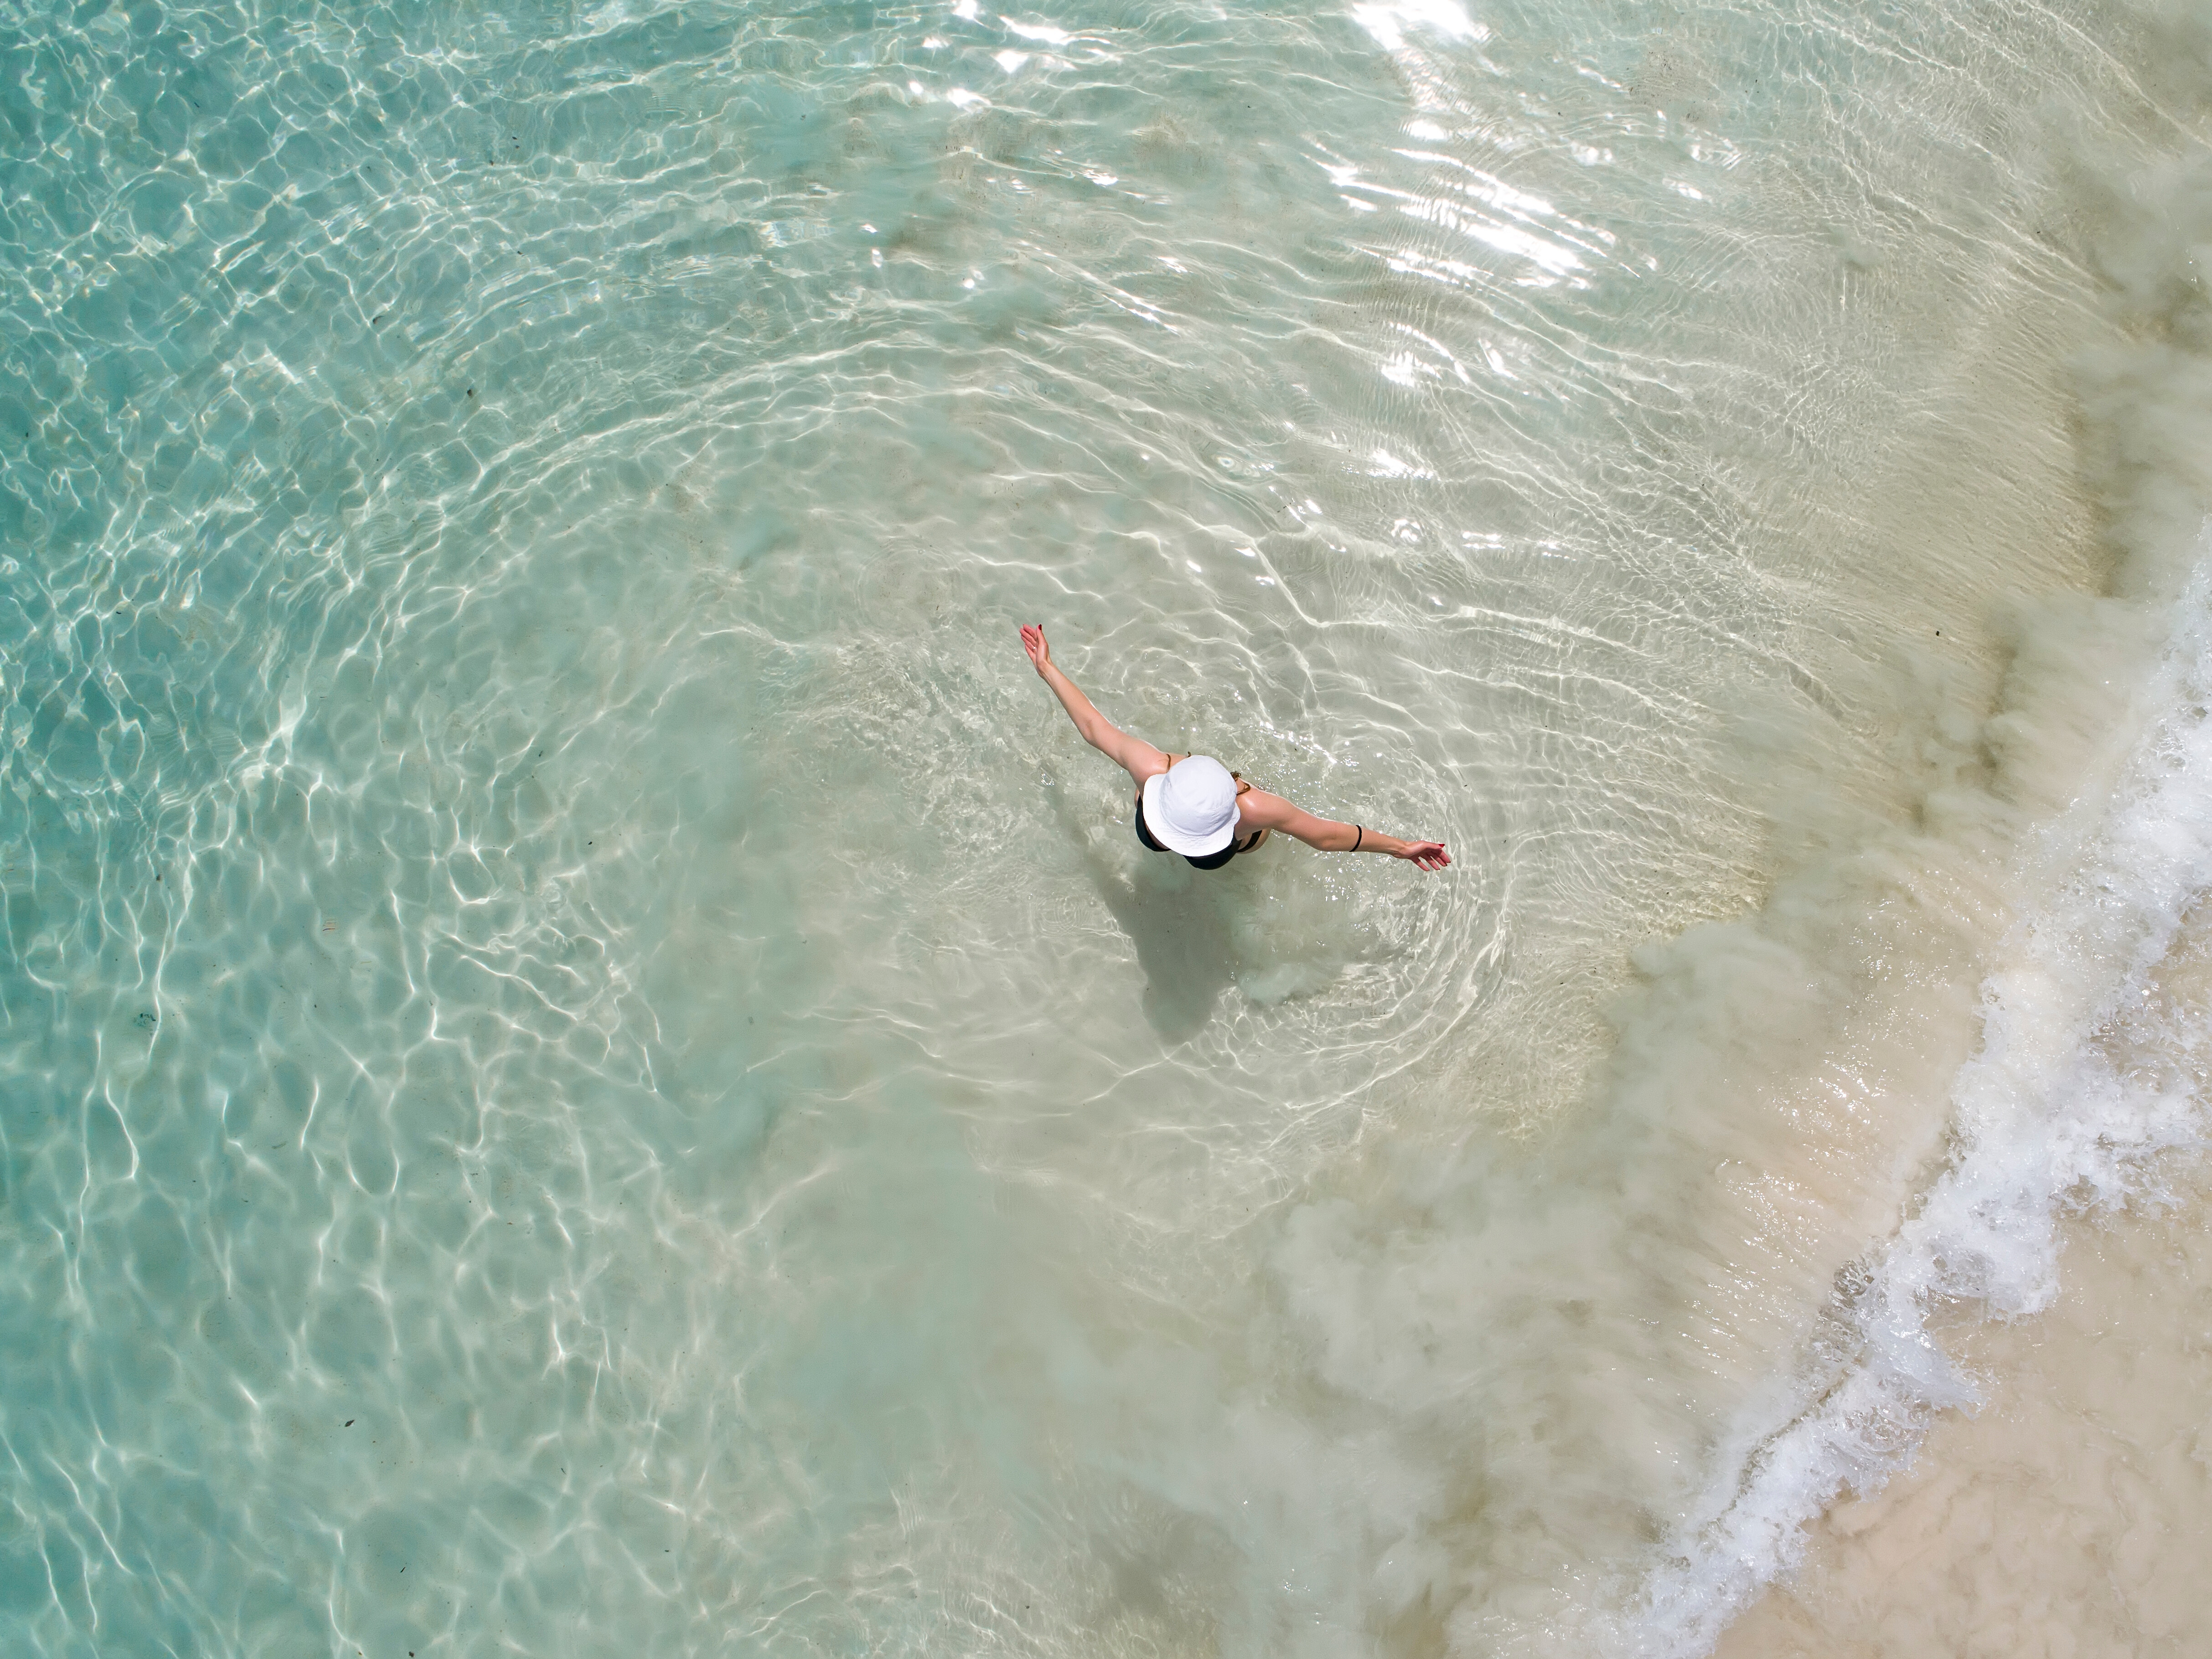 Bird's eye view of a person in the sea